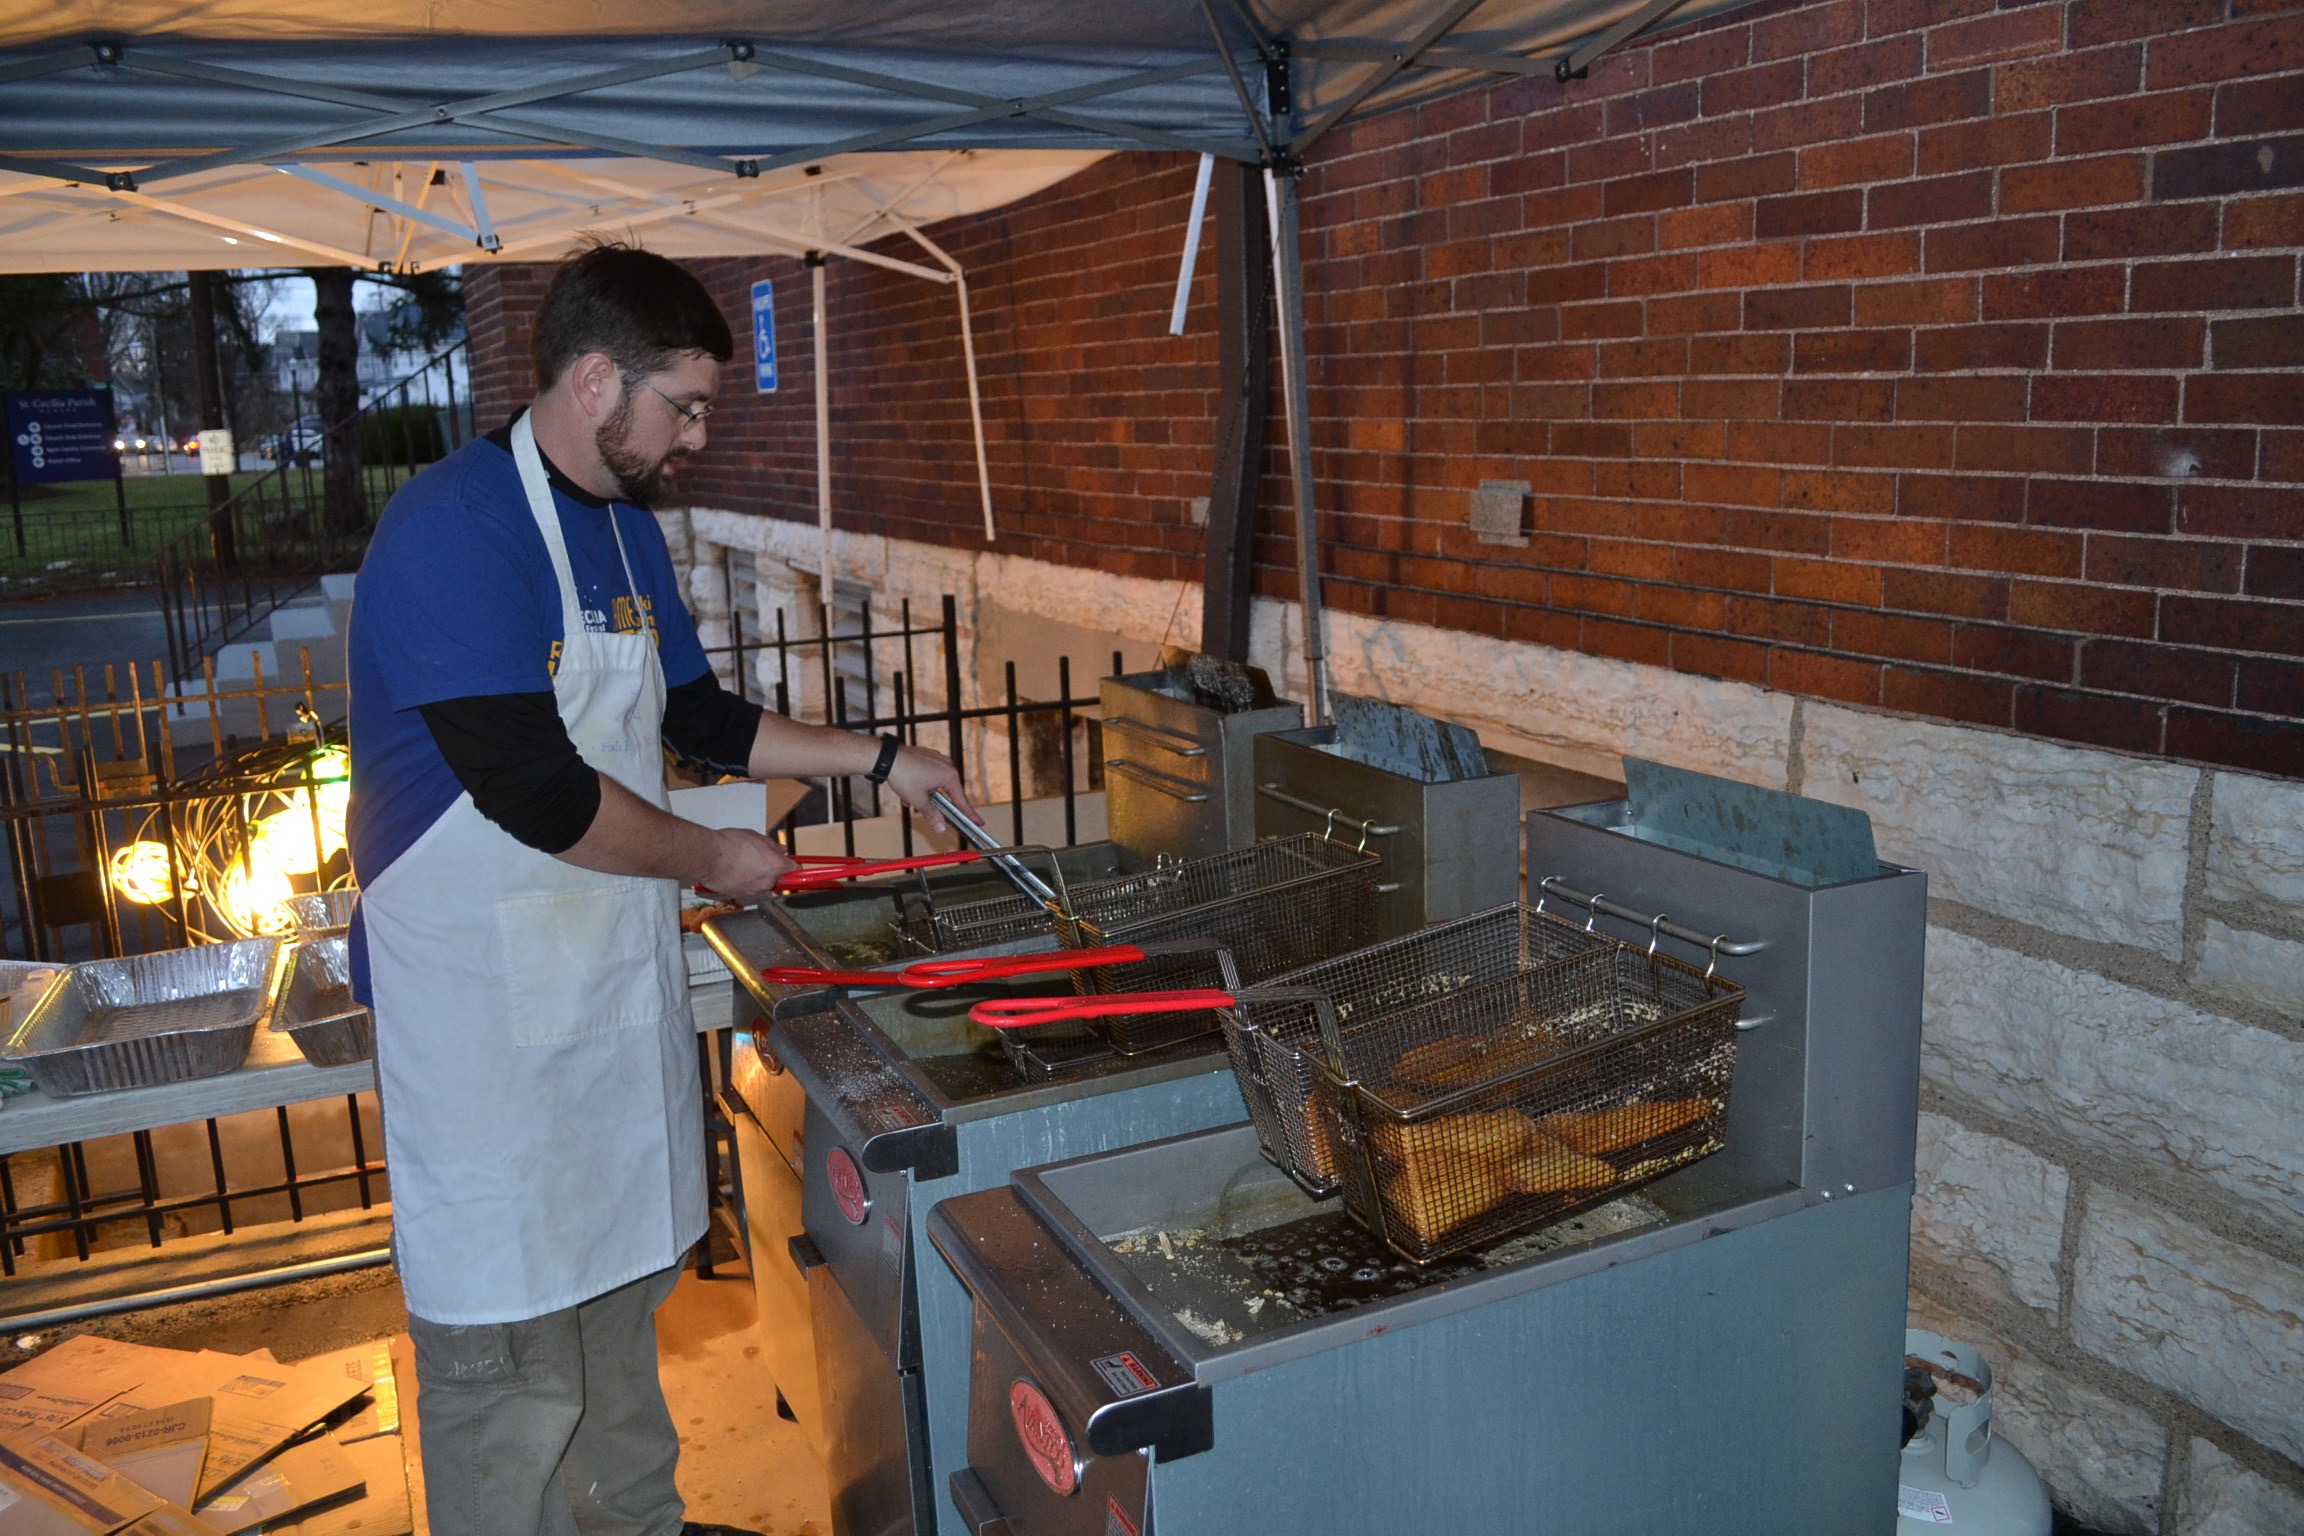 Kenny Haber oversees the fish at St. Cecilia Fish Fry in Oakley (CT Photo/Greg Hartman)